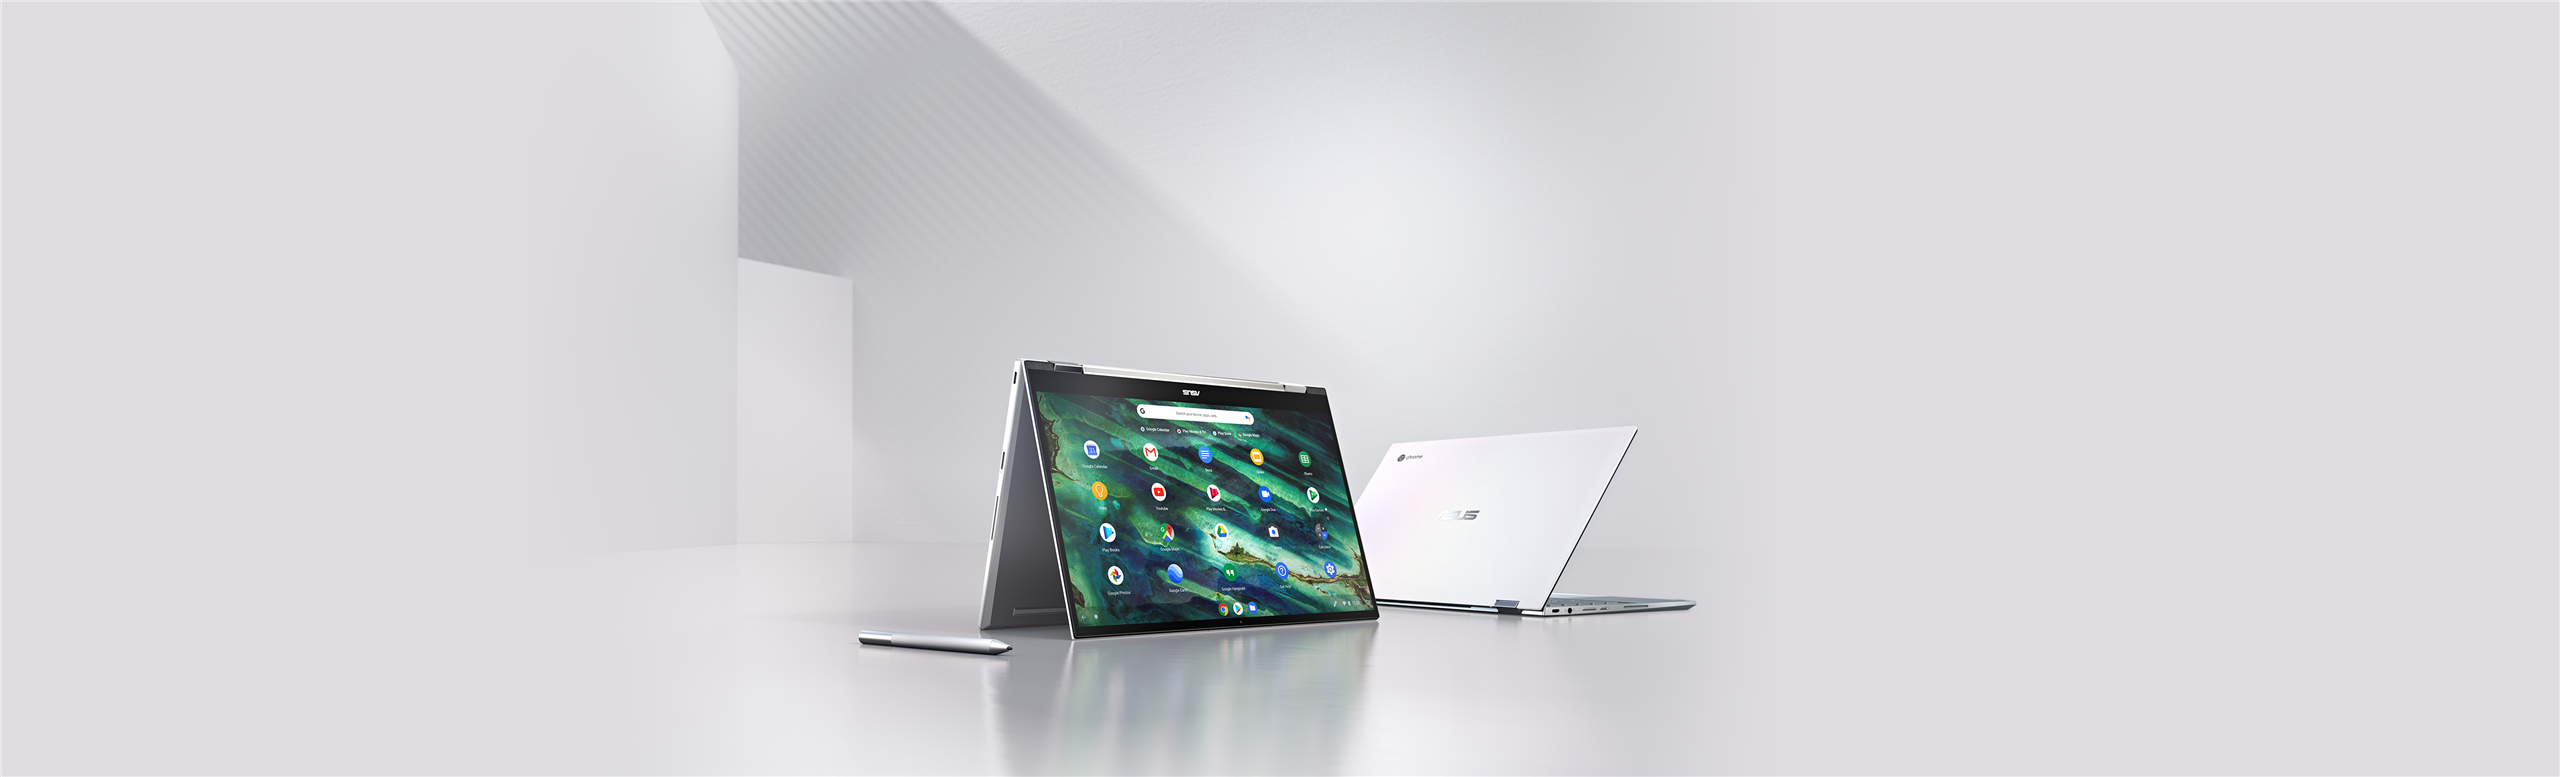 Two ASUS Chromebook Flip C436 are shown. The one at the front is in tent mode with an ASUS Pen beside. The other one at the back is in laptop mode showing its Immersive White cover.